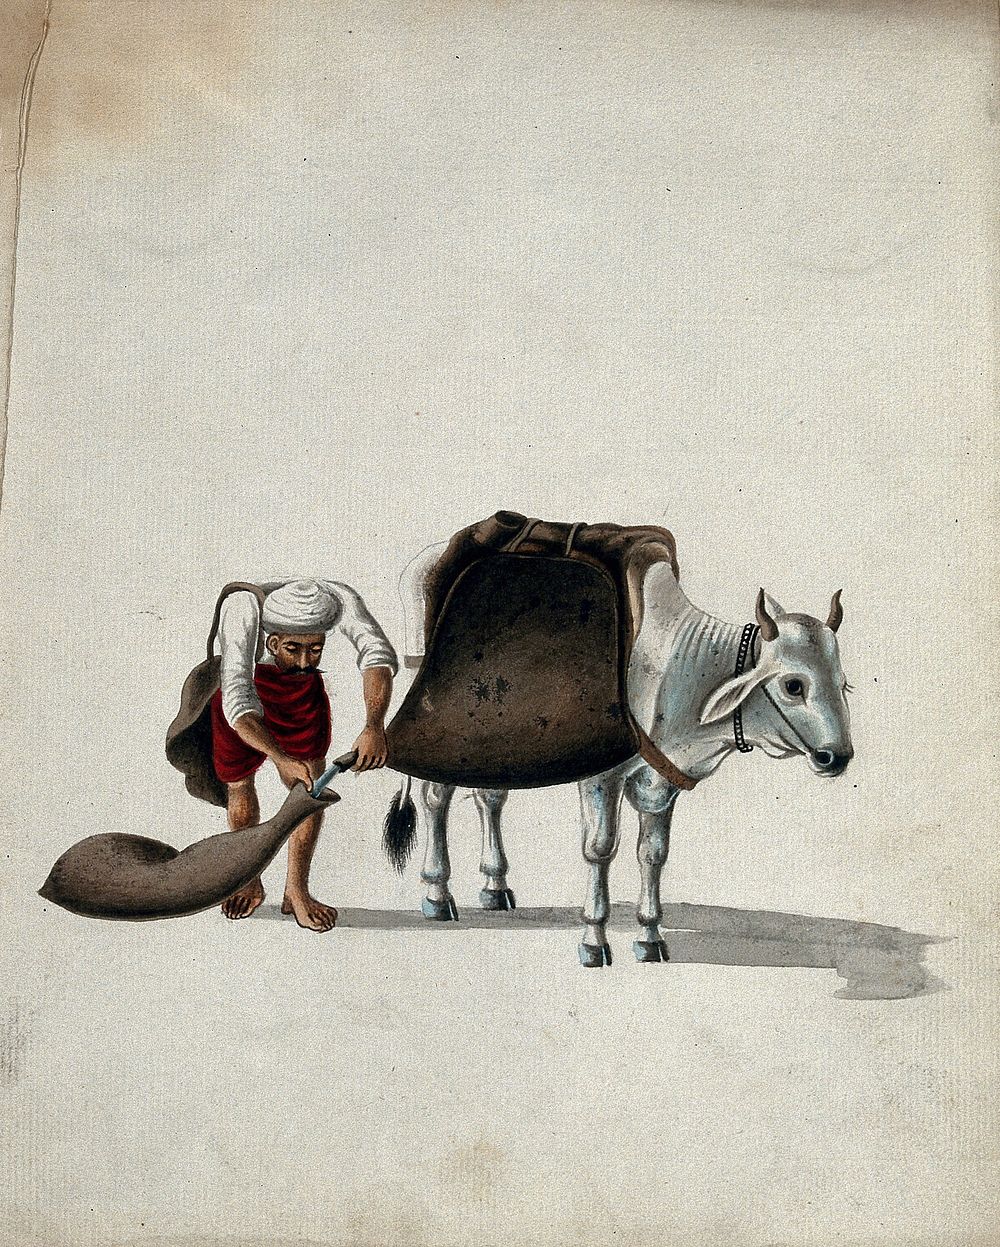 A man pouring water from large saddle bags on a cow into smaller water pouches. Gouache painting by an Indian artist.